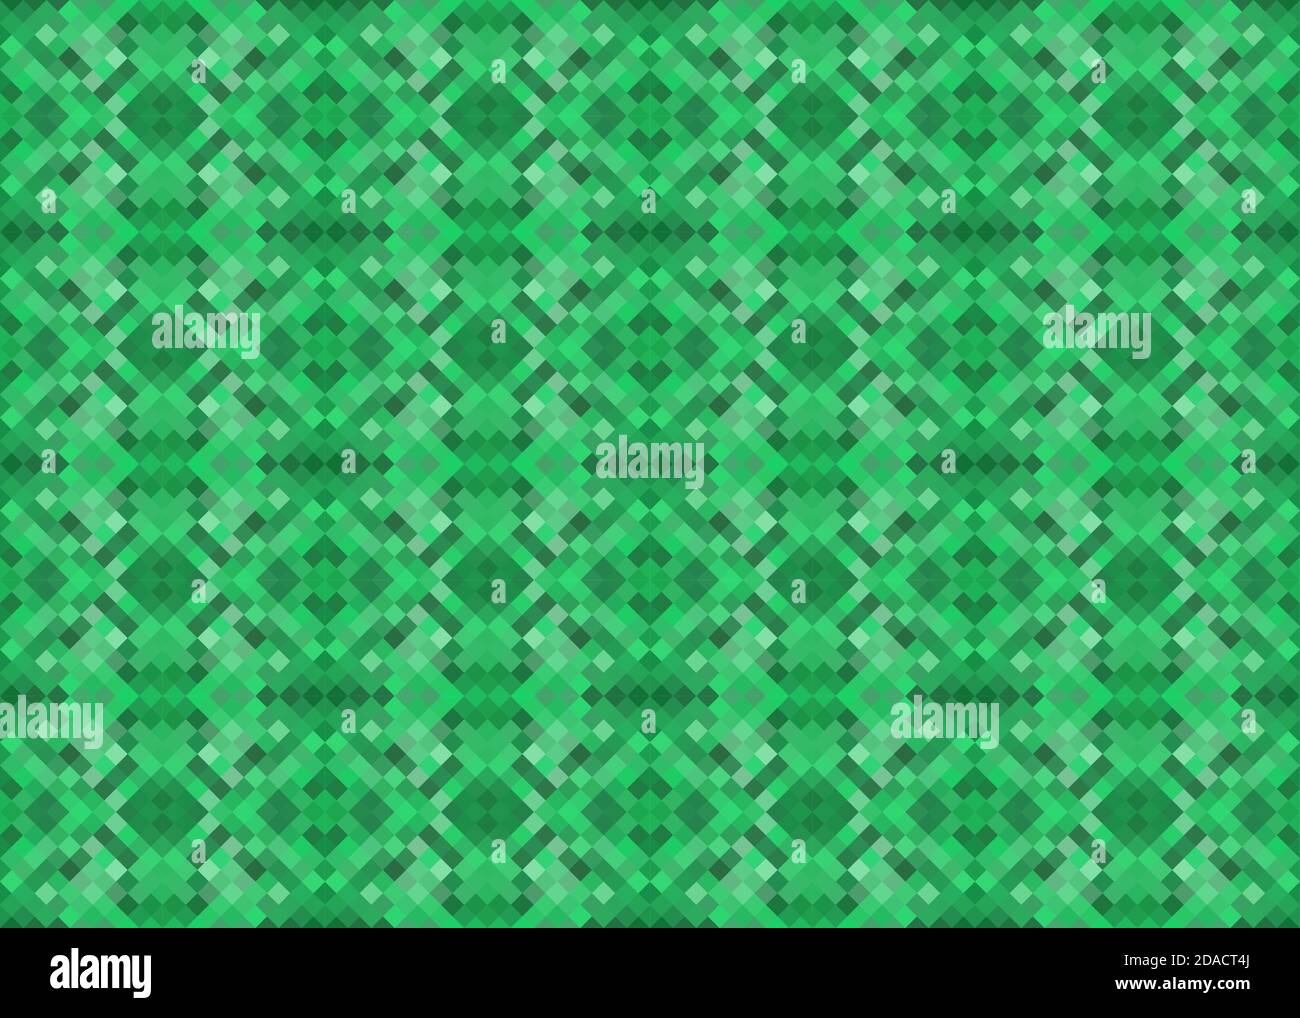 Geometric seamless patterns. Abstract geometric mosaic with vector. Stock Vector